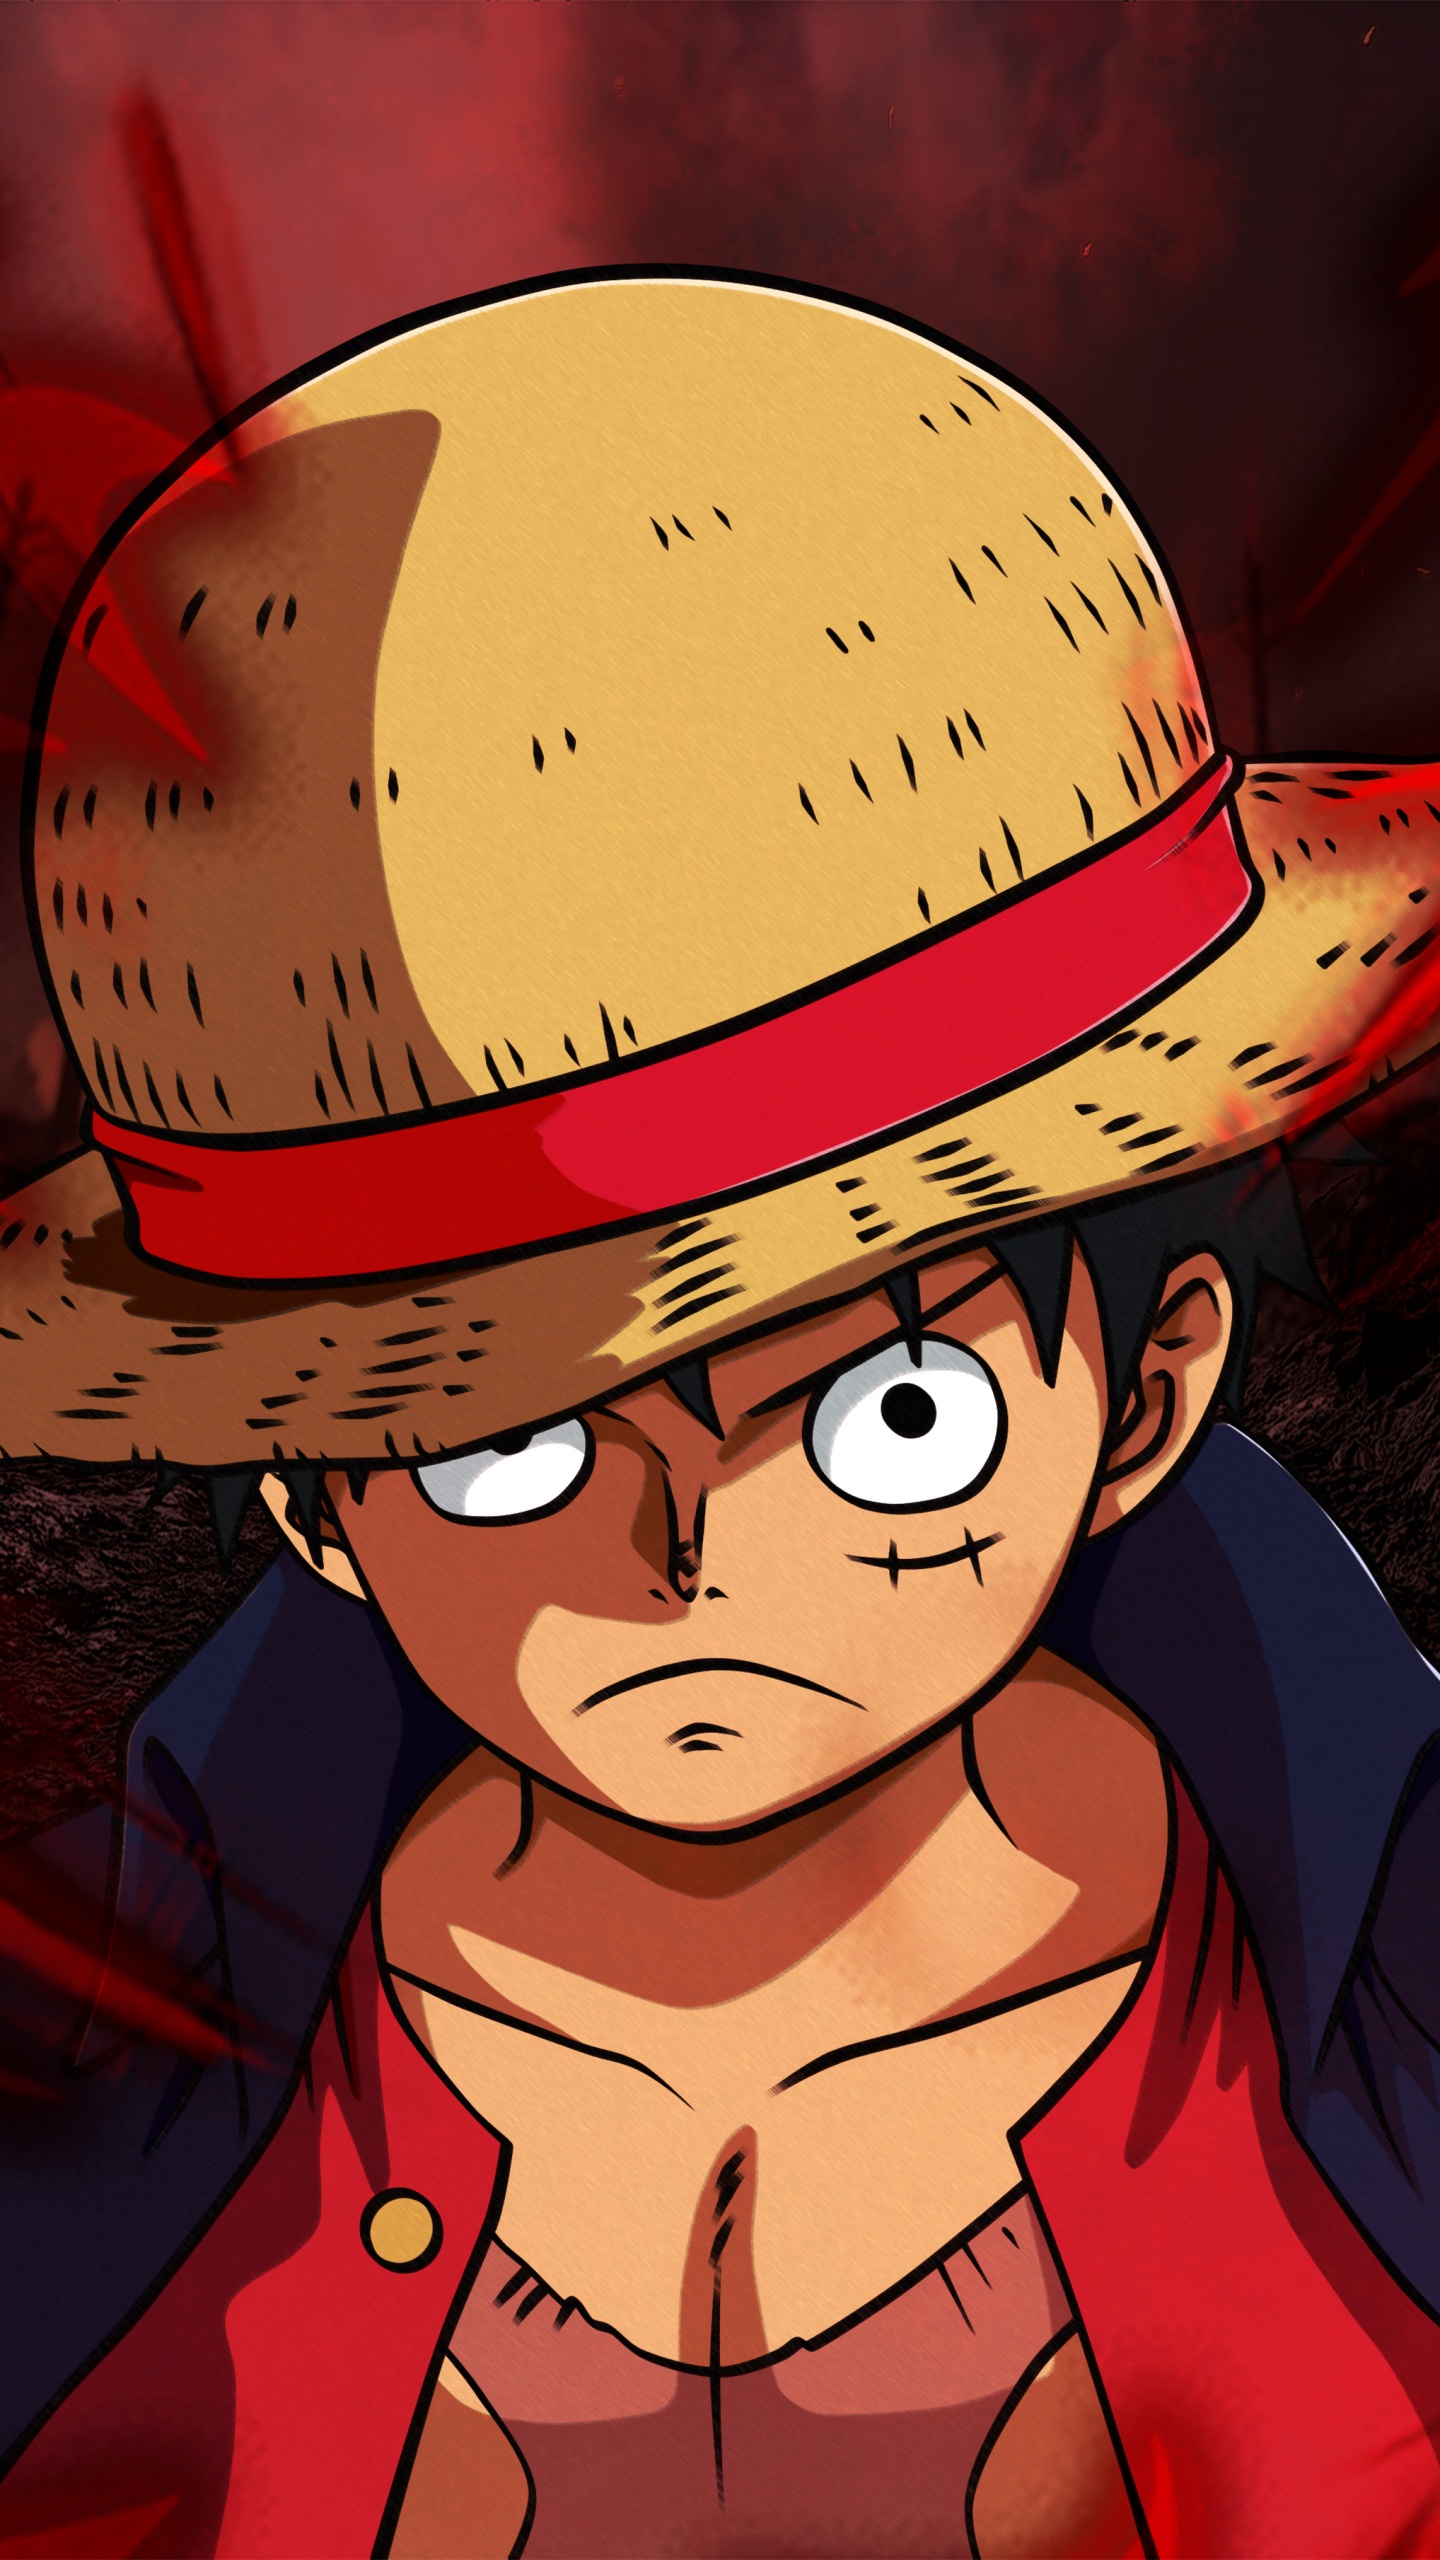 One Piece Wallpaper 2k22  One piece wallpaper iphone, Anime